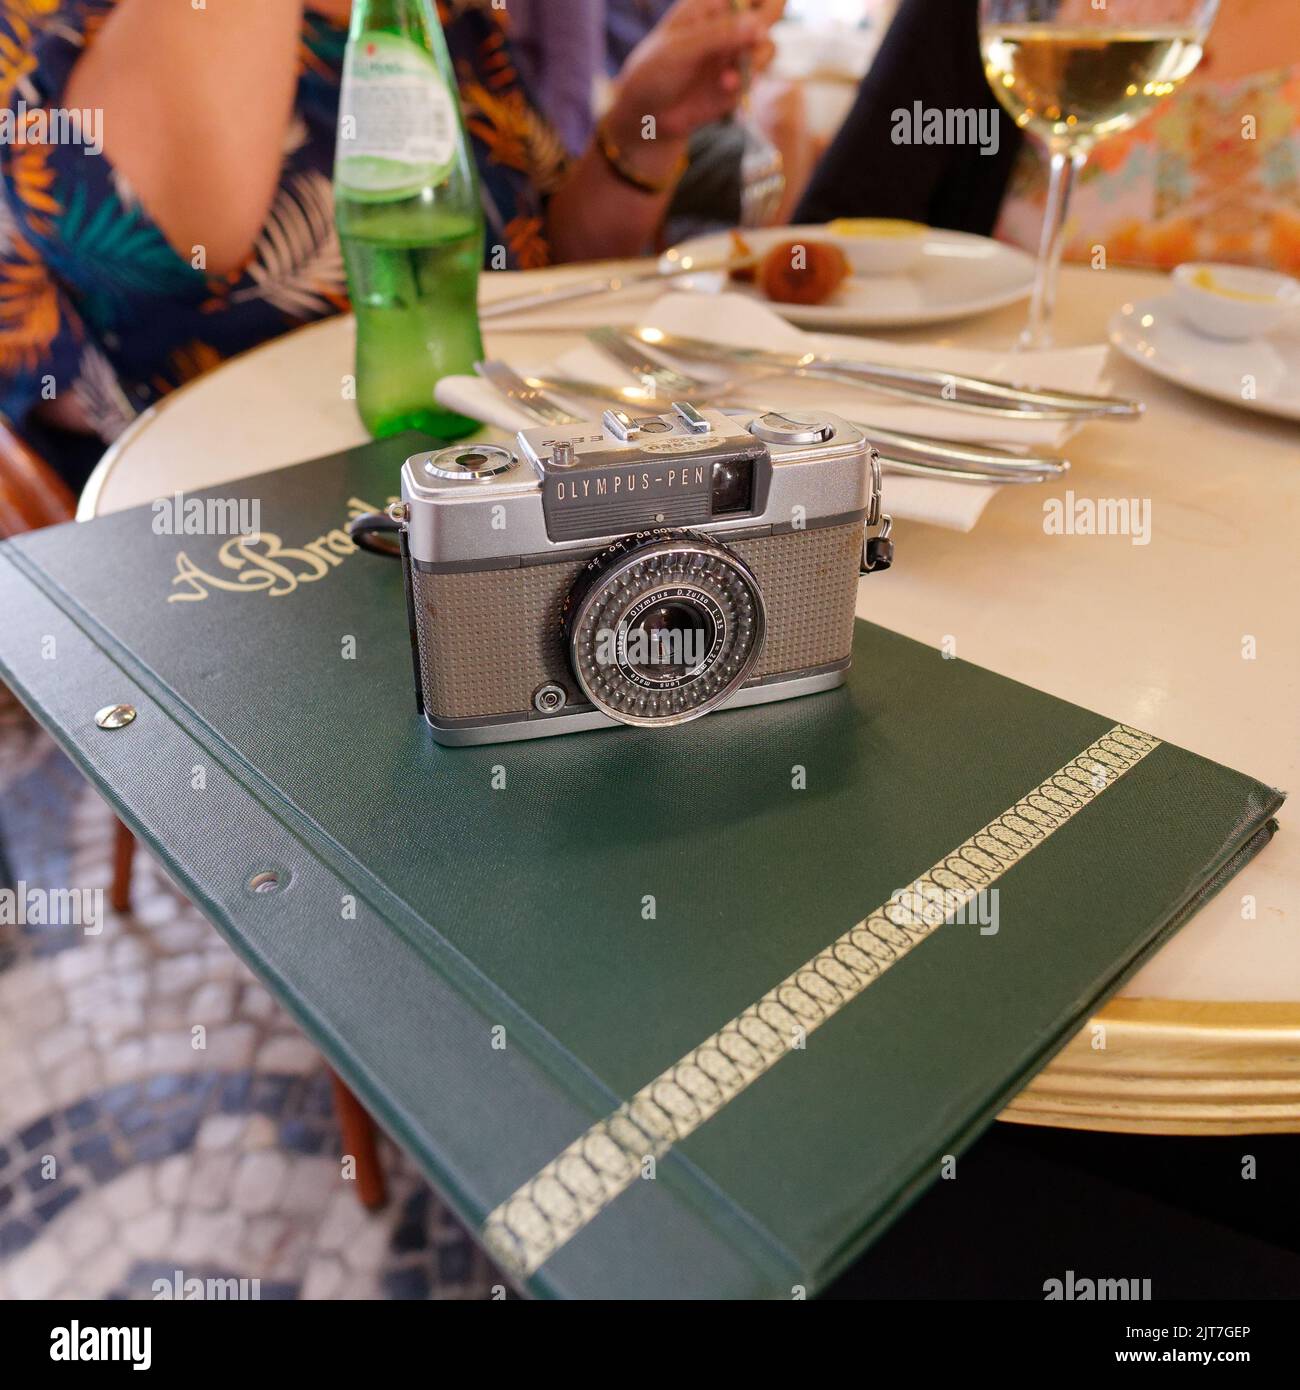 Reto styled Olympus Pen film camera on top of a menu on a table in the famous A Brasileira coffe shop in the Chiado neighbourhood of Lisbon Stock Photo